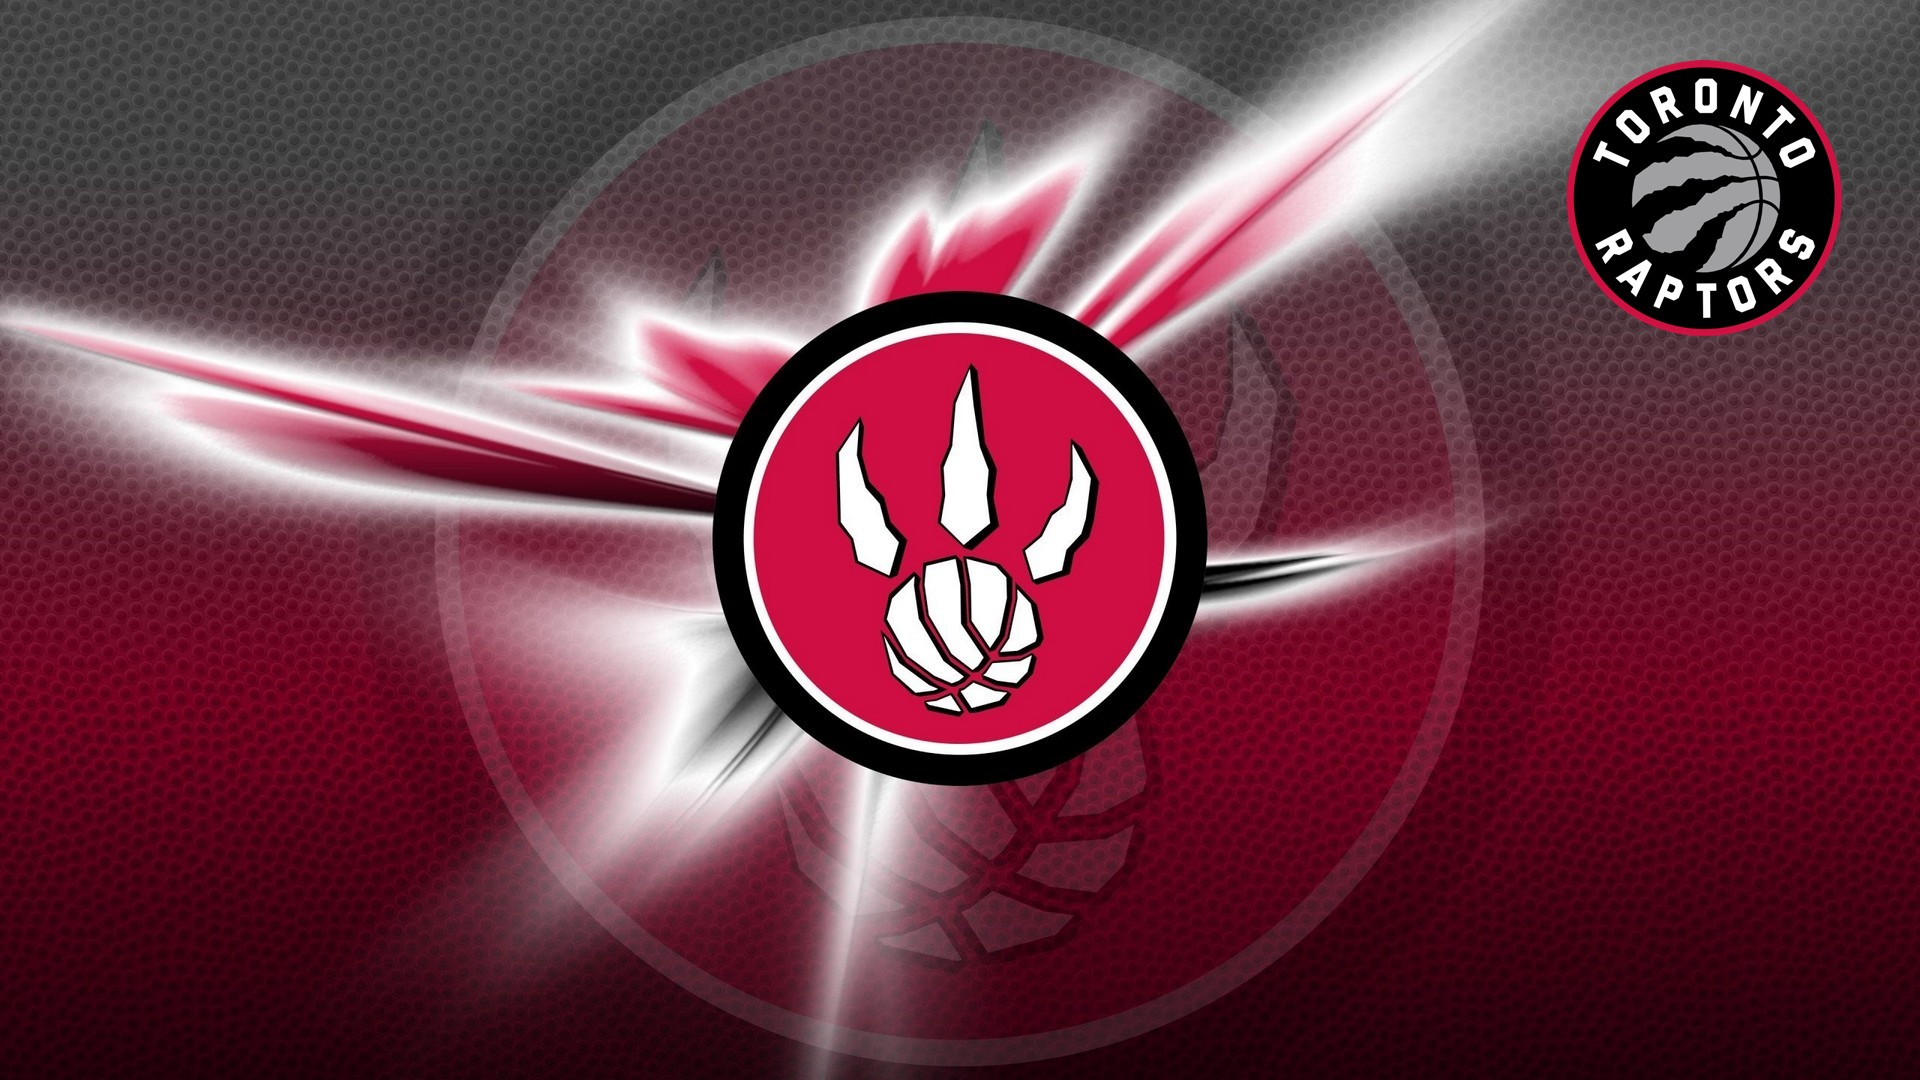 Toronto Raptors Desktop Wallpaper with image dimensions 1920x1080 pixel. You can make this wallpaper for your Desktop Computer Backgrounds, Windows or Mac Screensavers, iPhone Lock screen, Tablet or Android and another Mobile Phone device